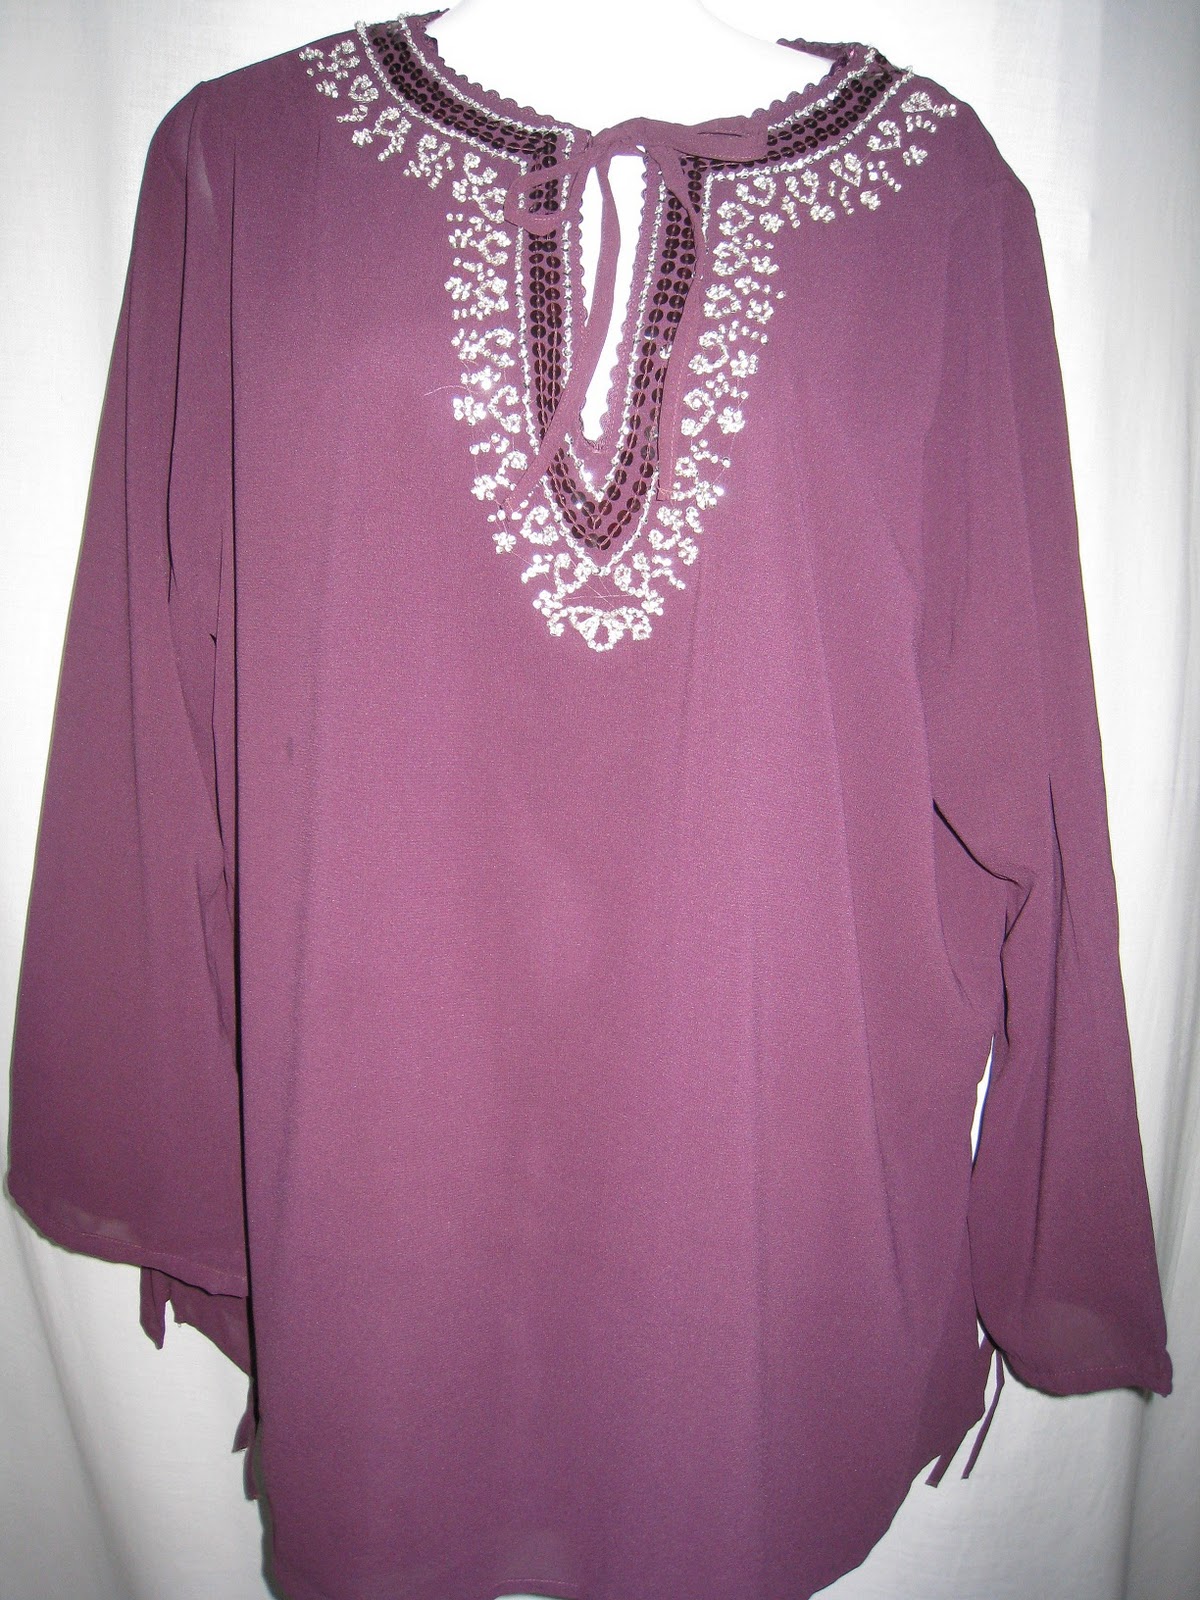 Where Plus is a Fabulous Thing!: *SOLD* Size 26 Top - Purple Beaded